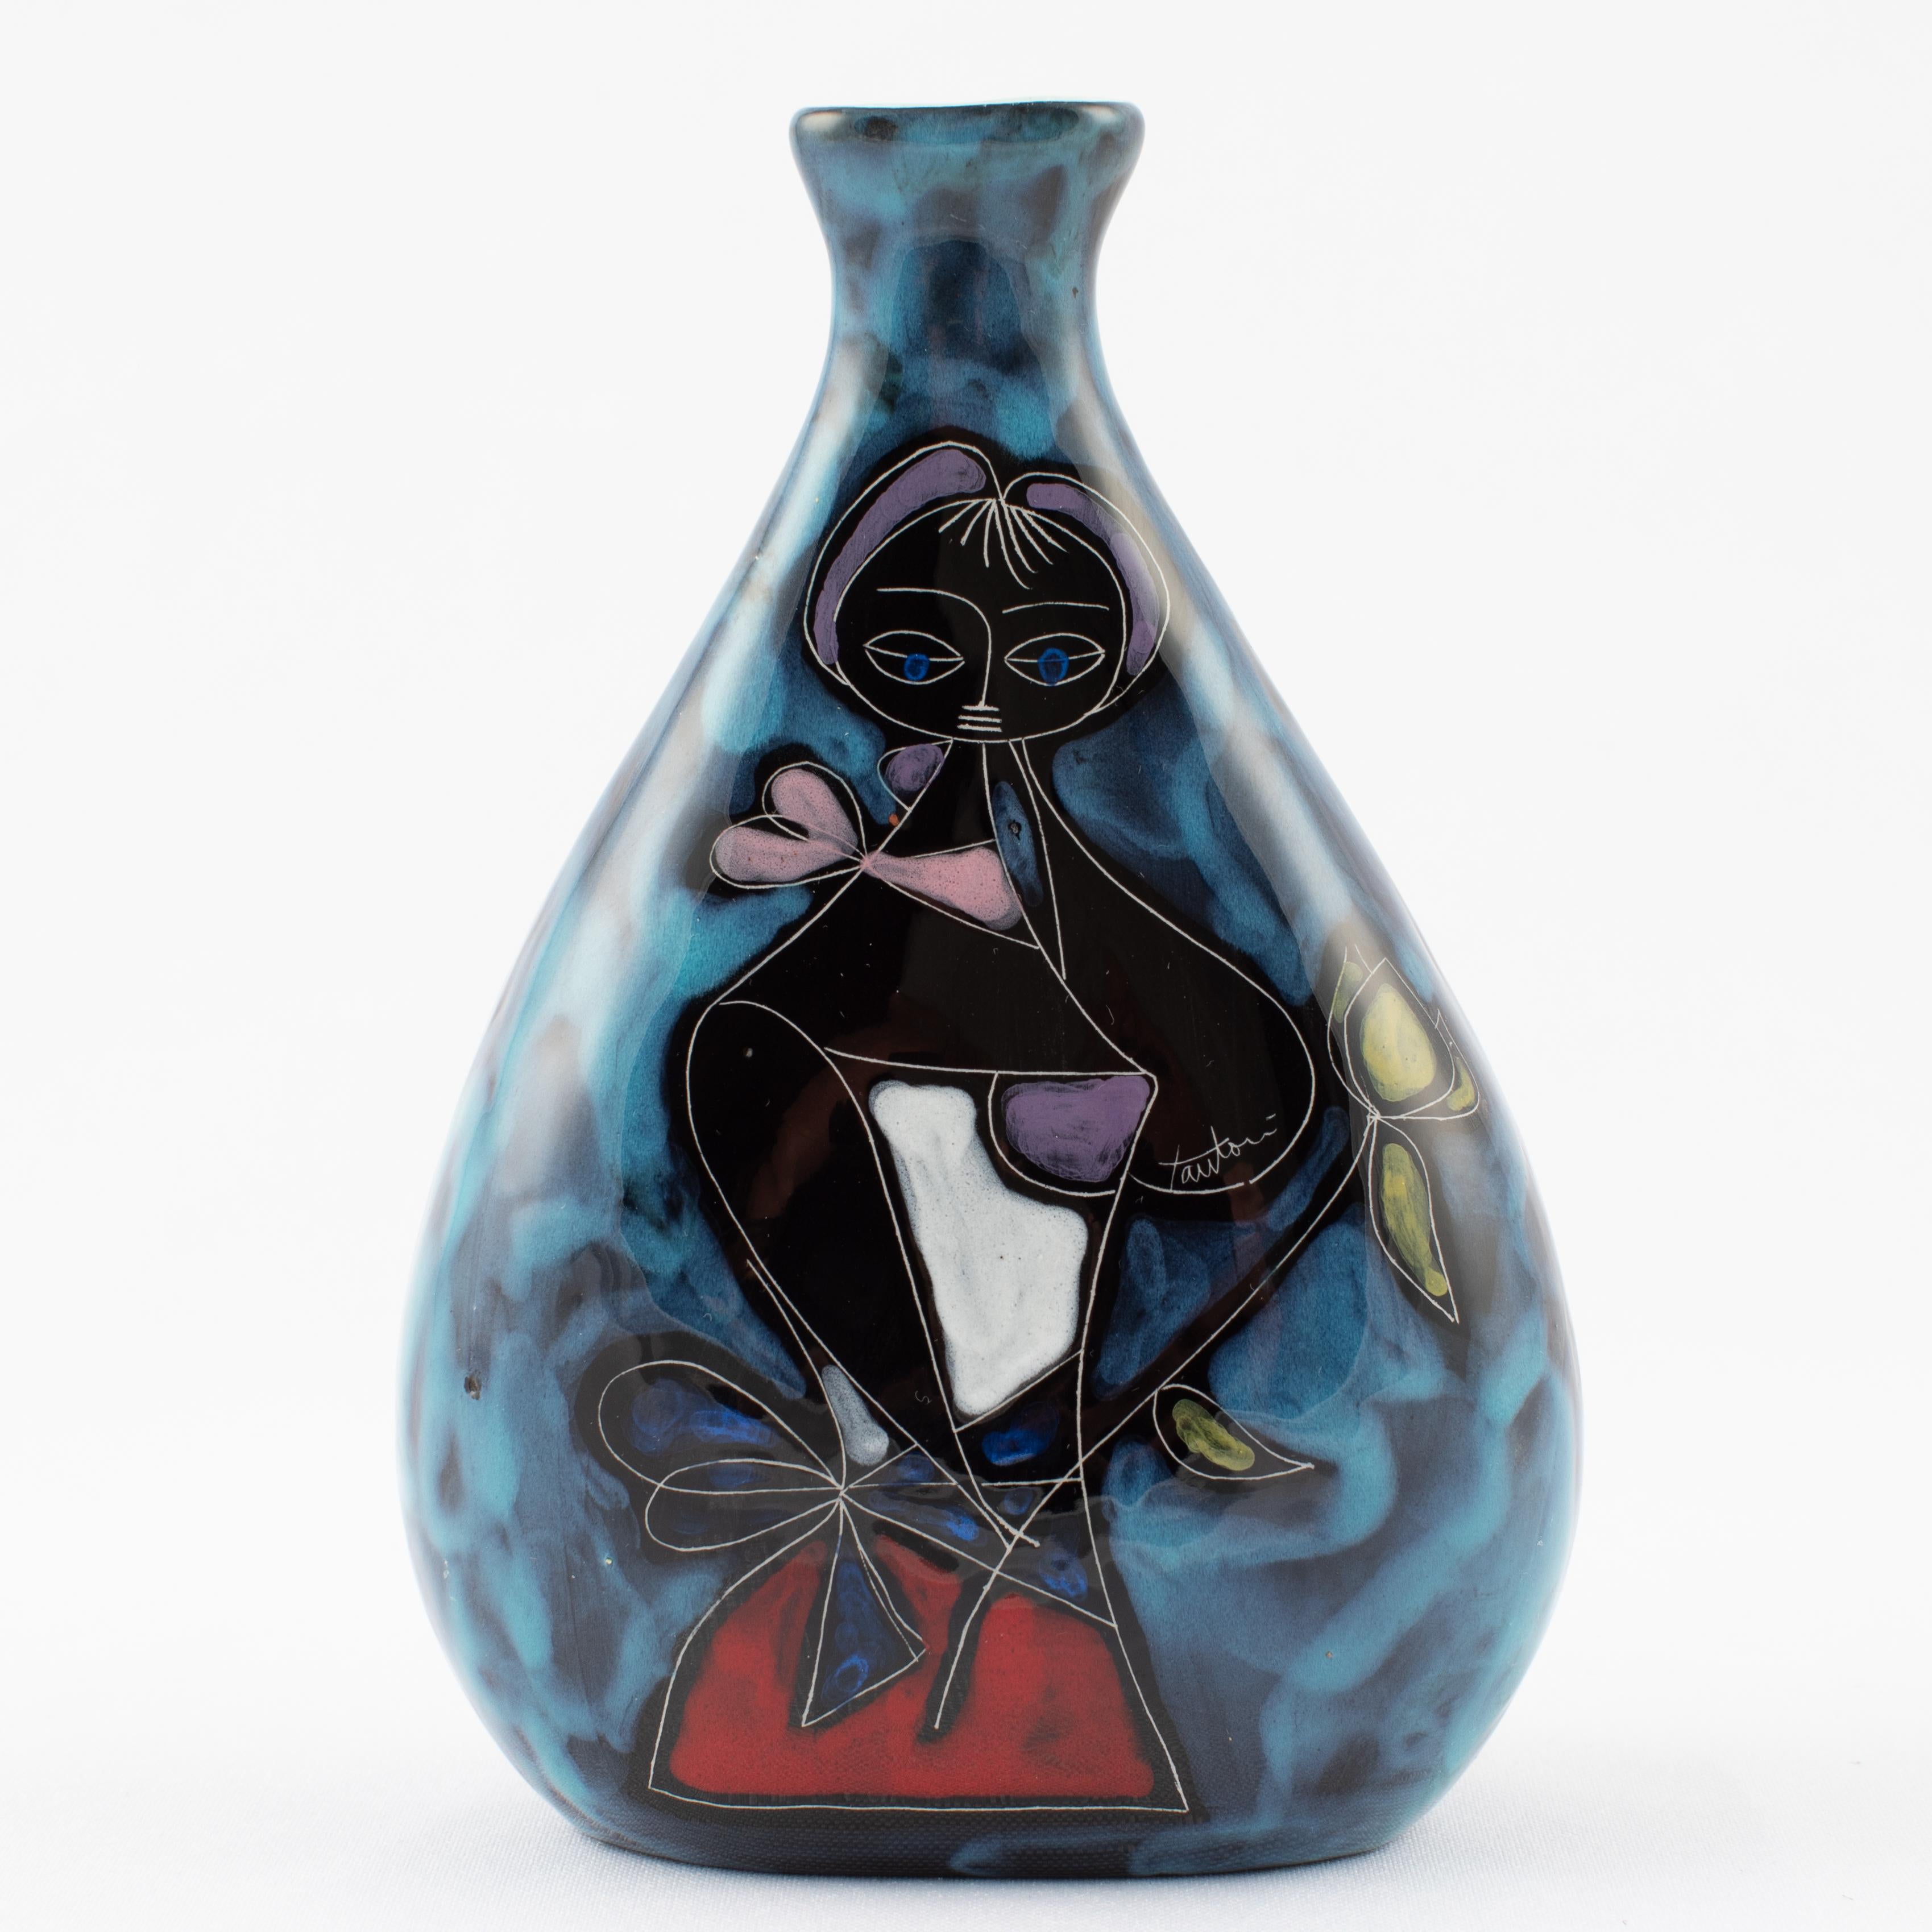 Shapely bud vase with incised female figure by Italian master Marcello Fantoni. Mottled blue background surrounds a stylized midcentury female figure rendered in lavenders, red, blue and white, holding a green flower. Sky-blue interior glaze. Signed